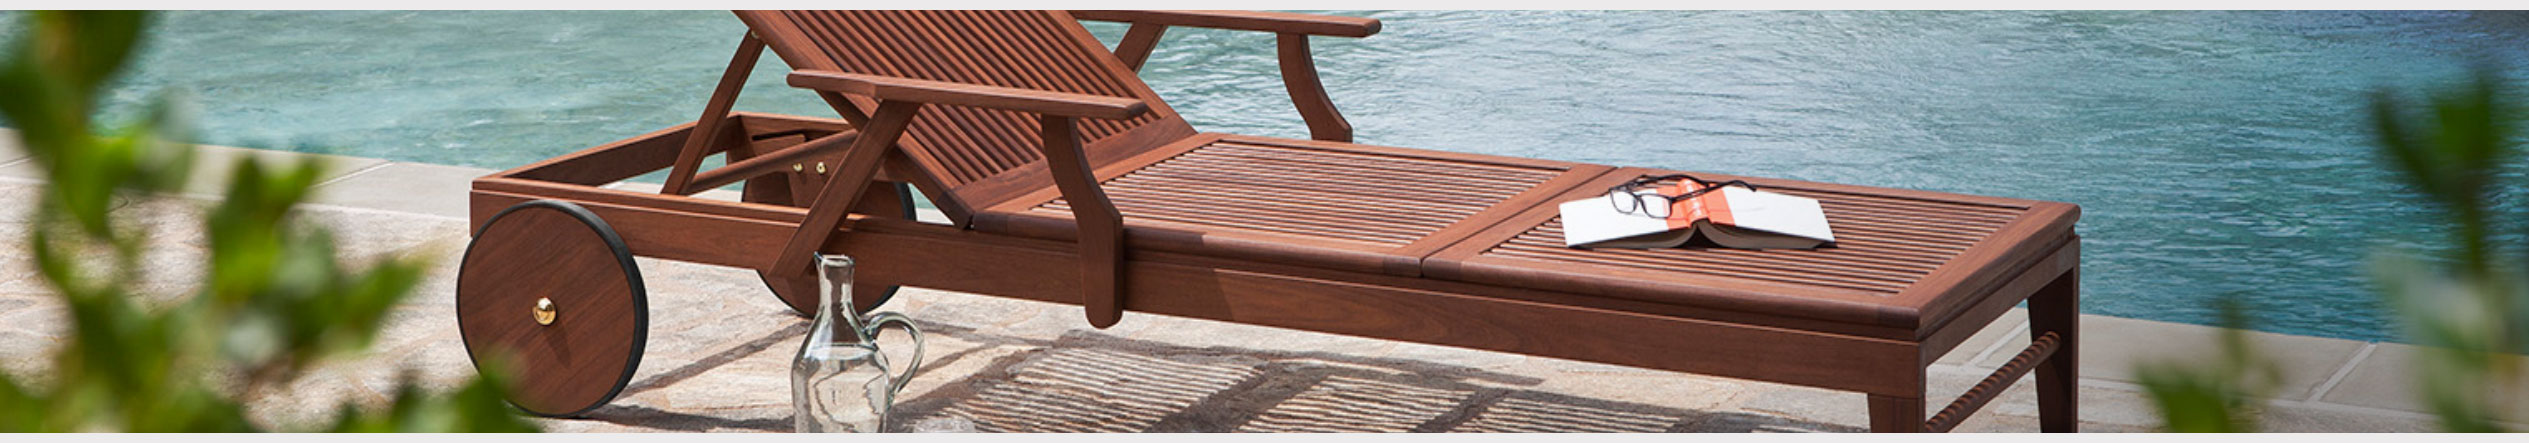 Outdoor Patio & Deck furniture for sale at Jordan's Furniture stores in MA, NH and RI